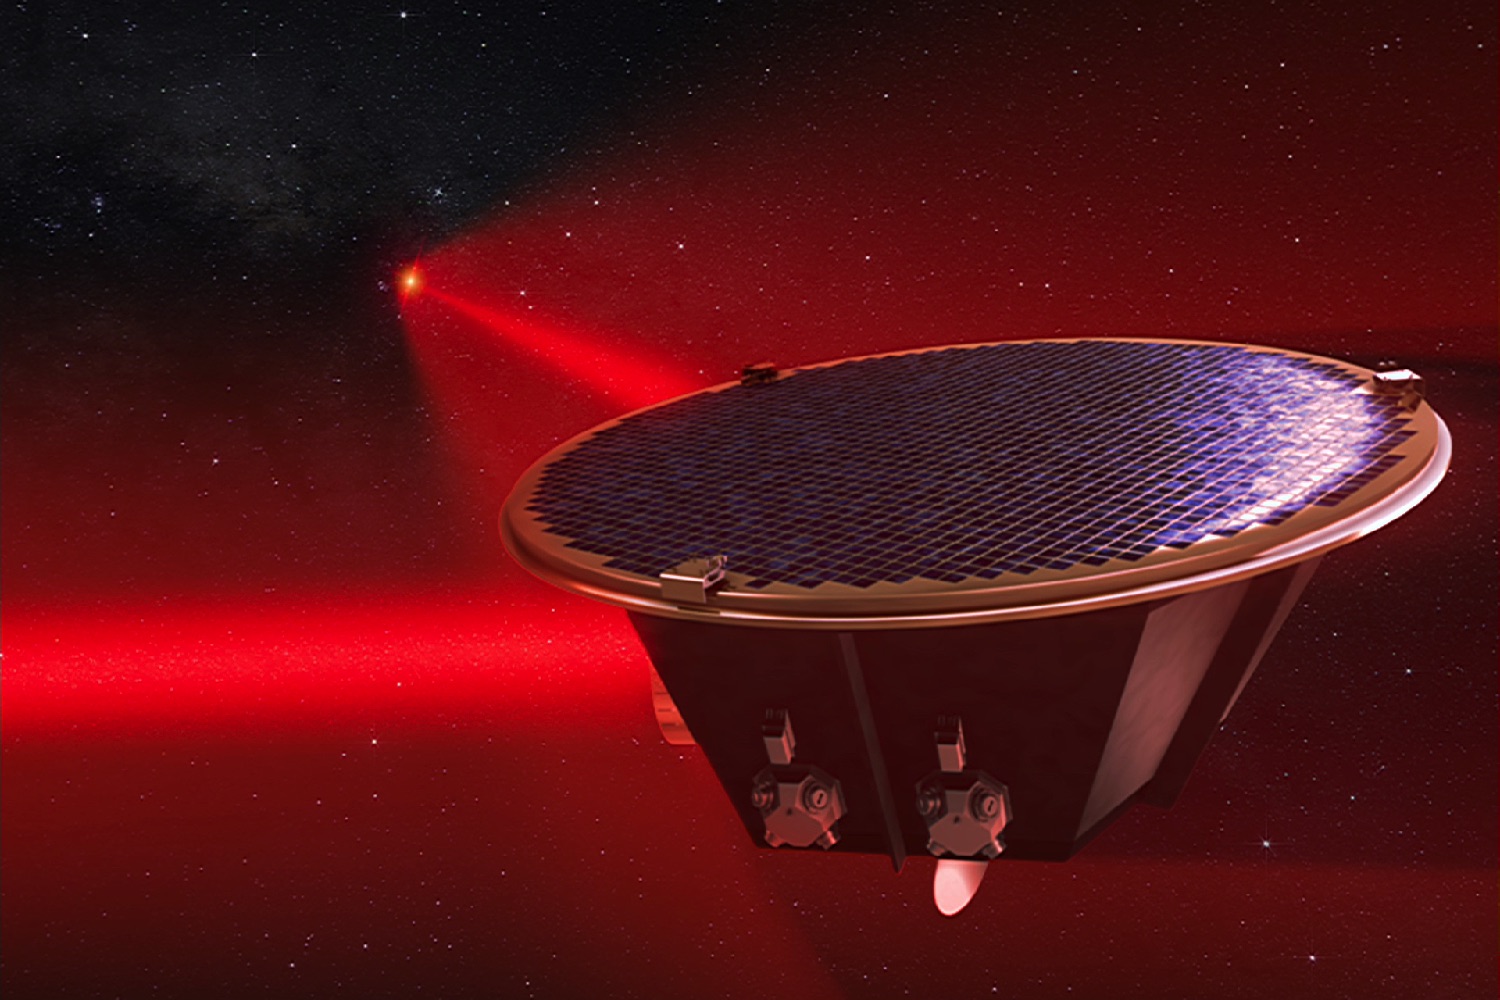 esa lisa mission 2034 mother spacecraft connected by lasers